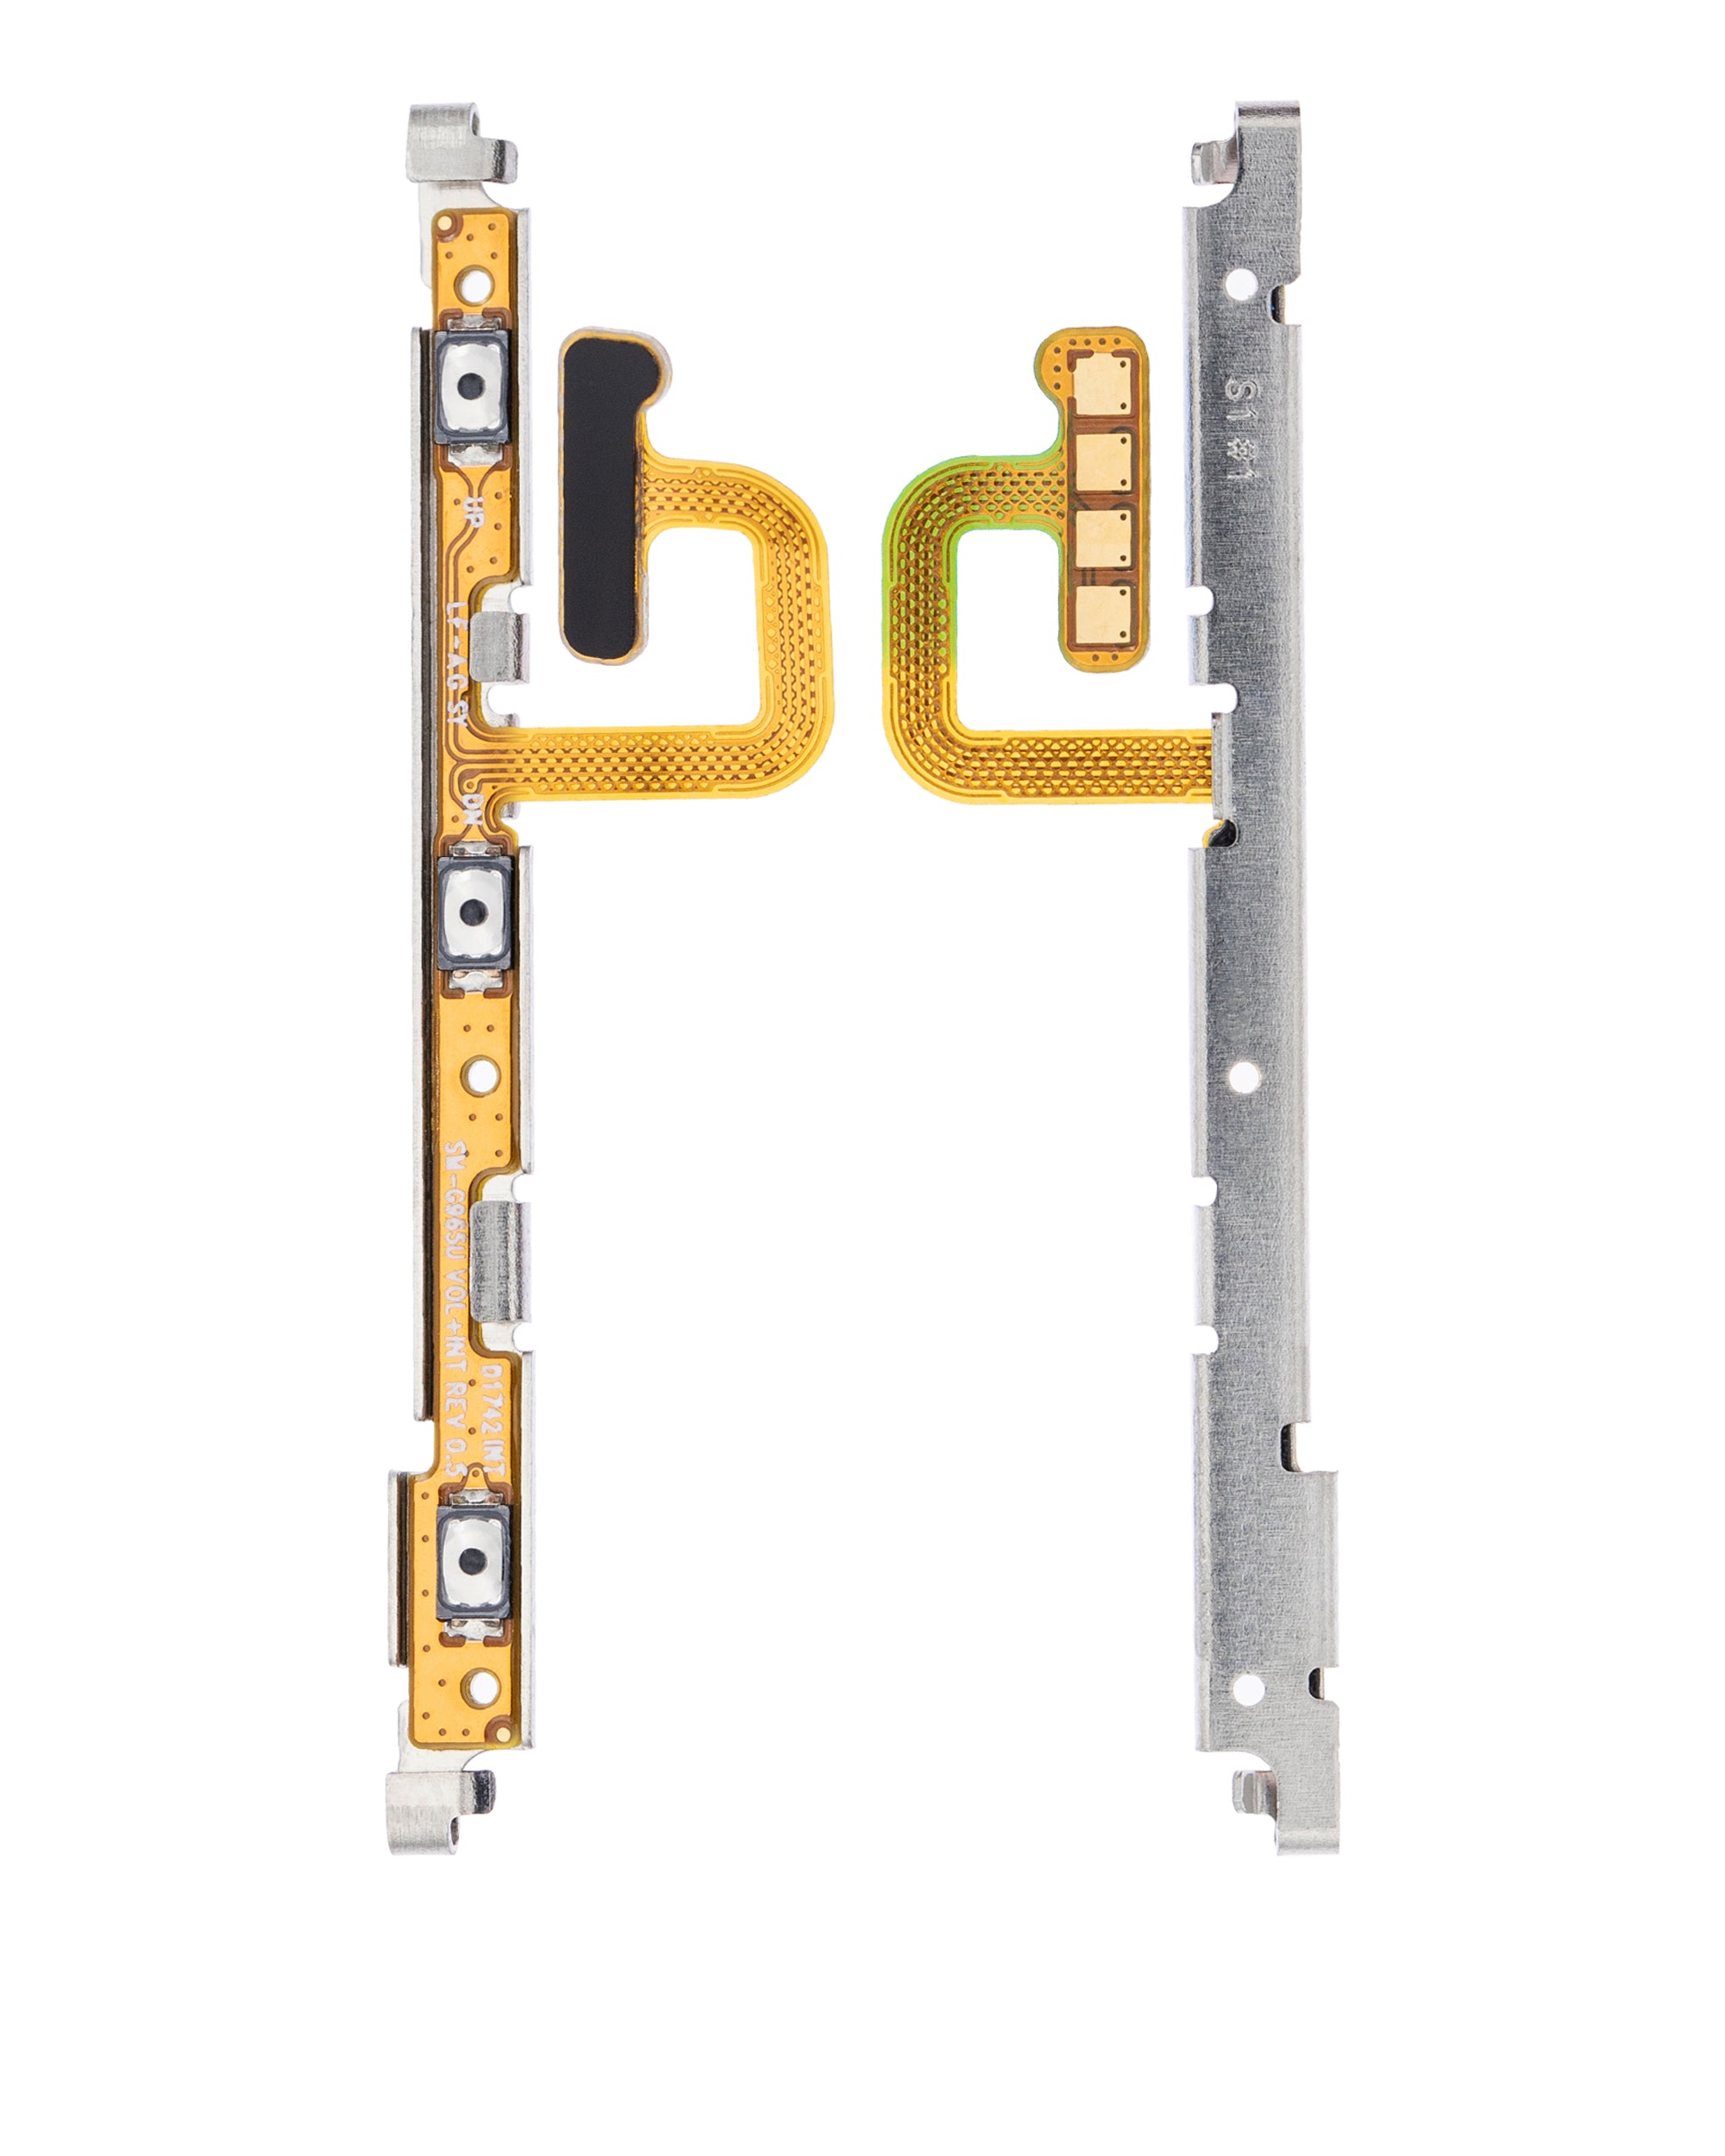 For Samsung Galaxy S9 / S9 Plus Volume Button Flex Cable Replacement